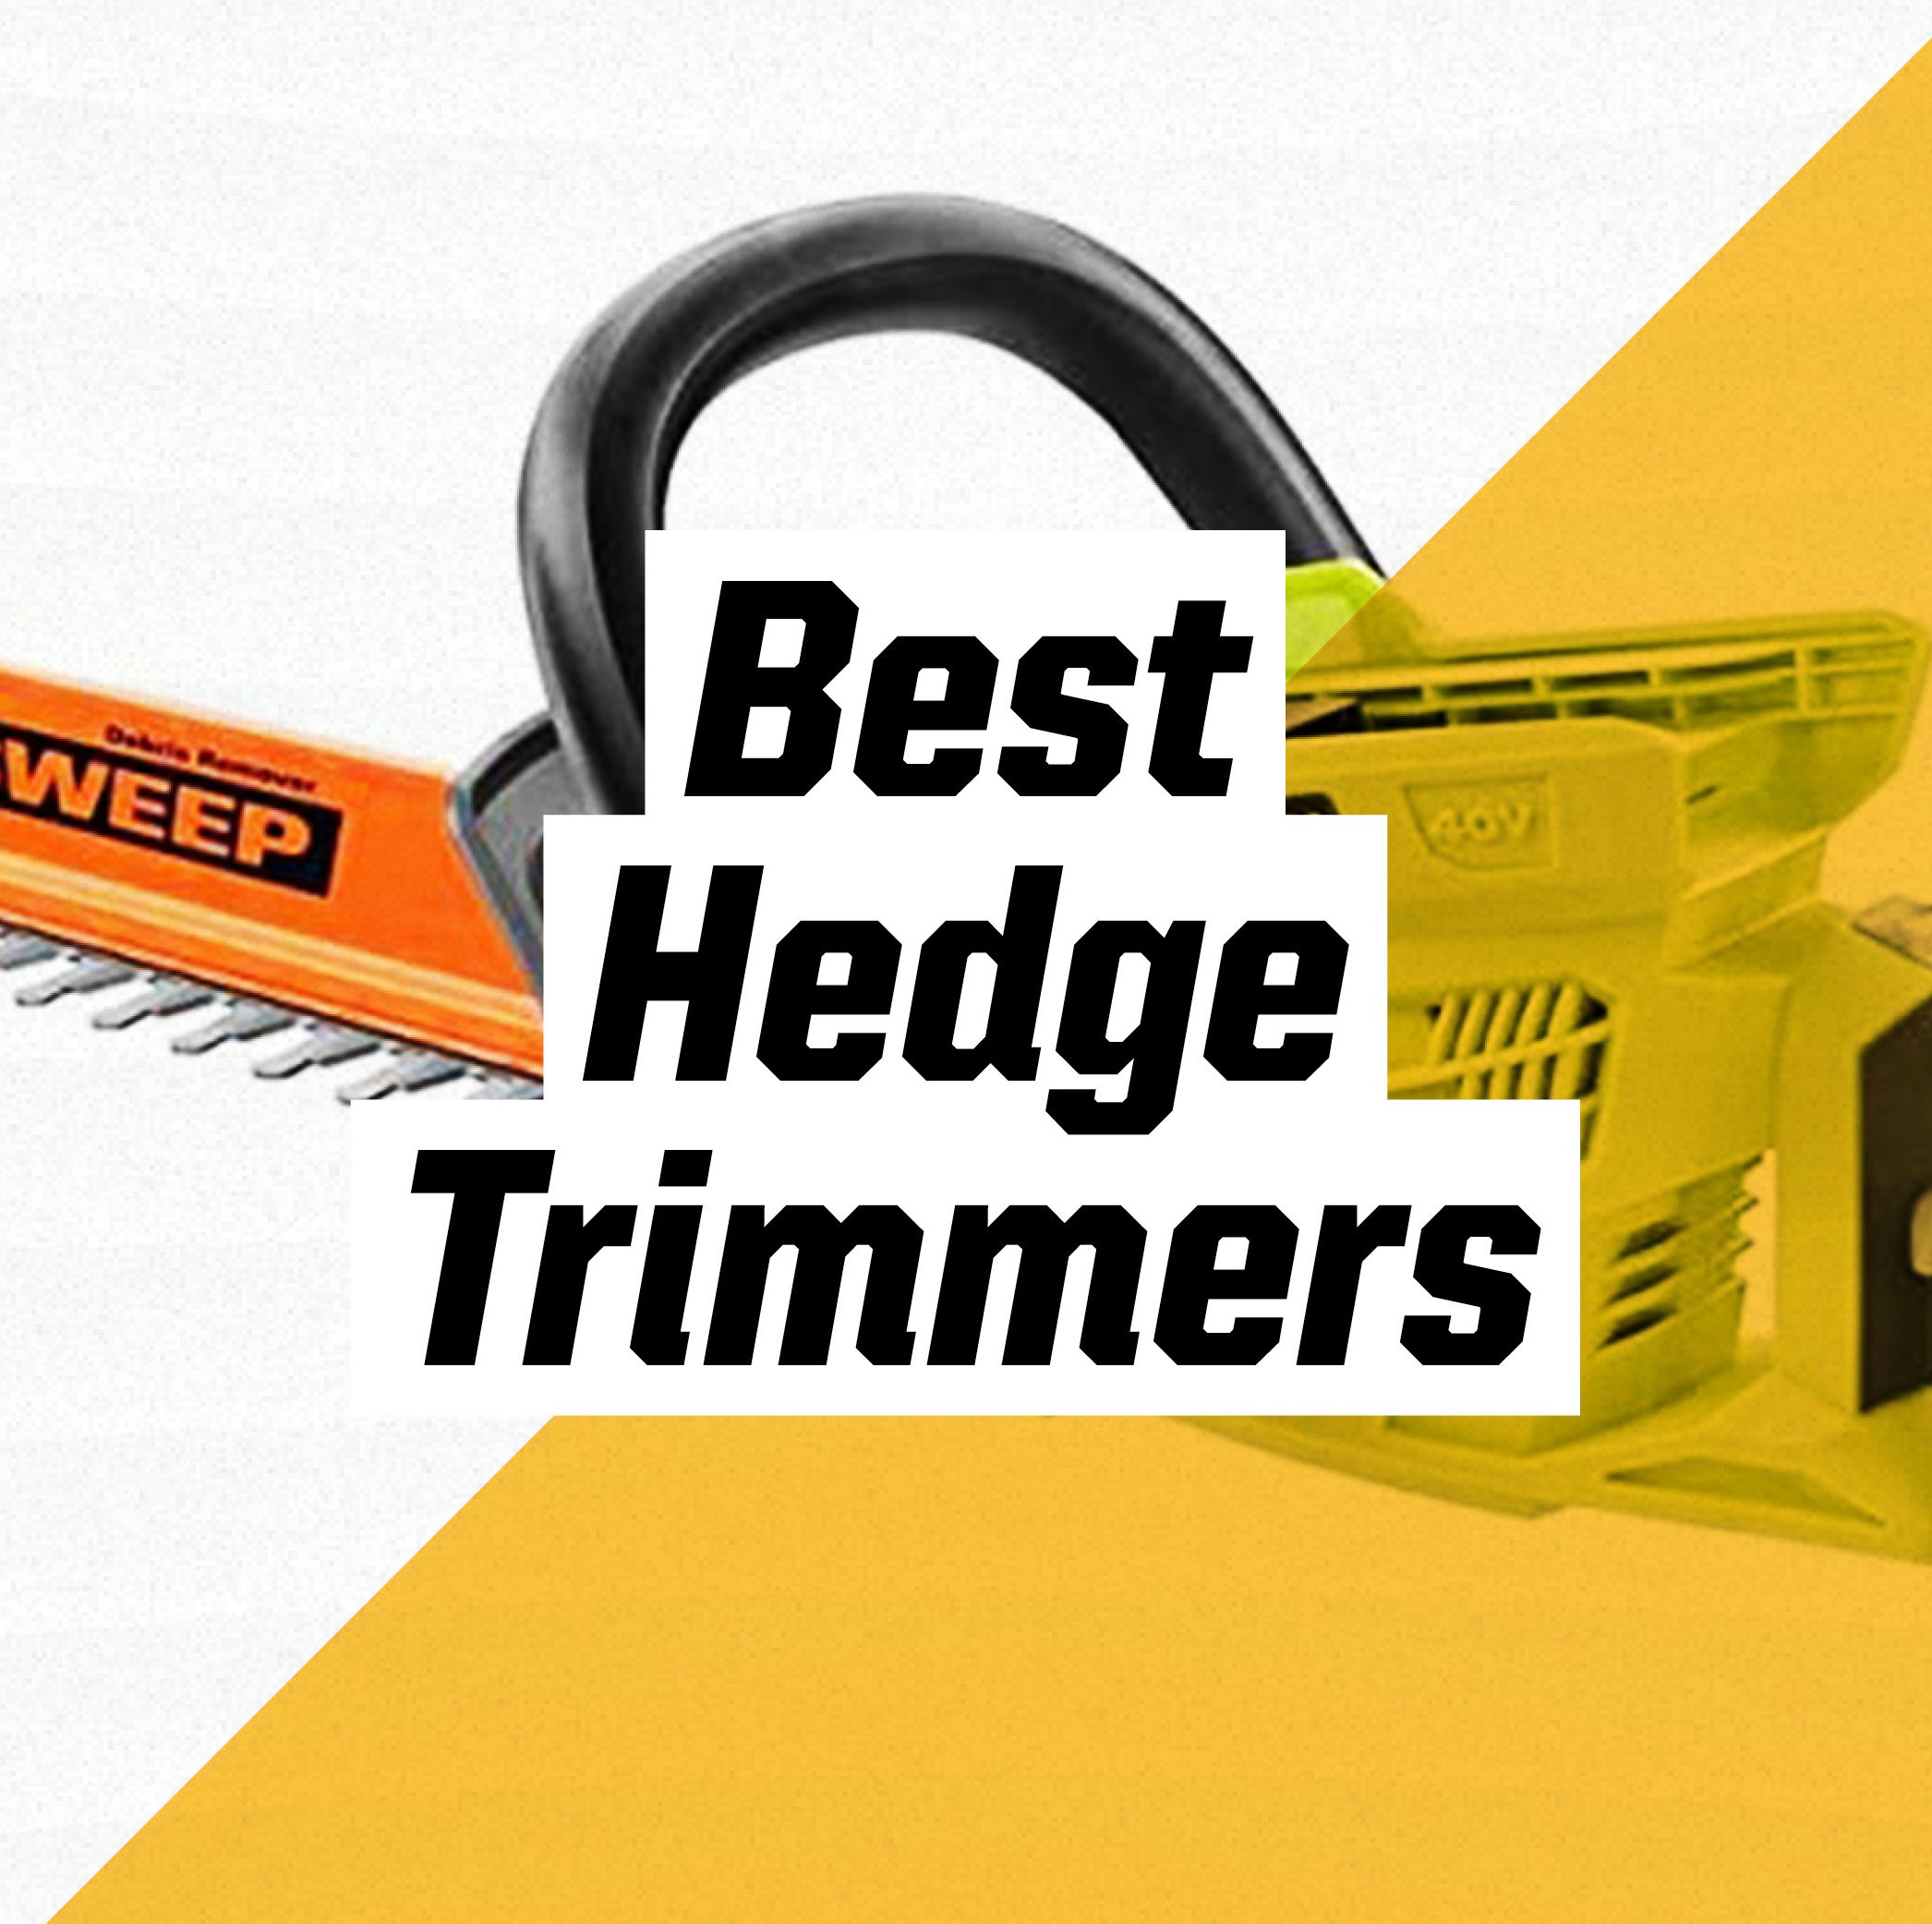 The Best Hedge Trimmers You Can Buy